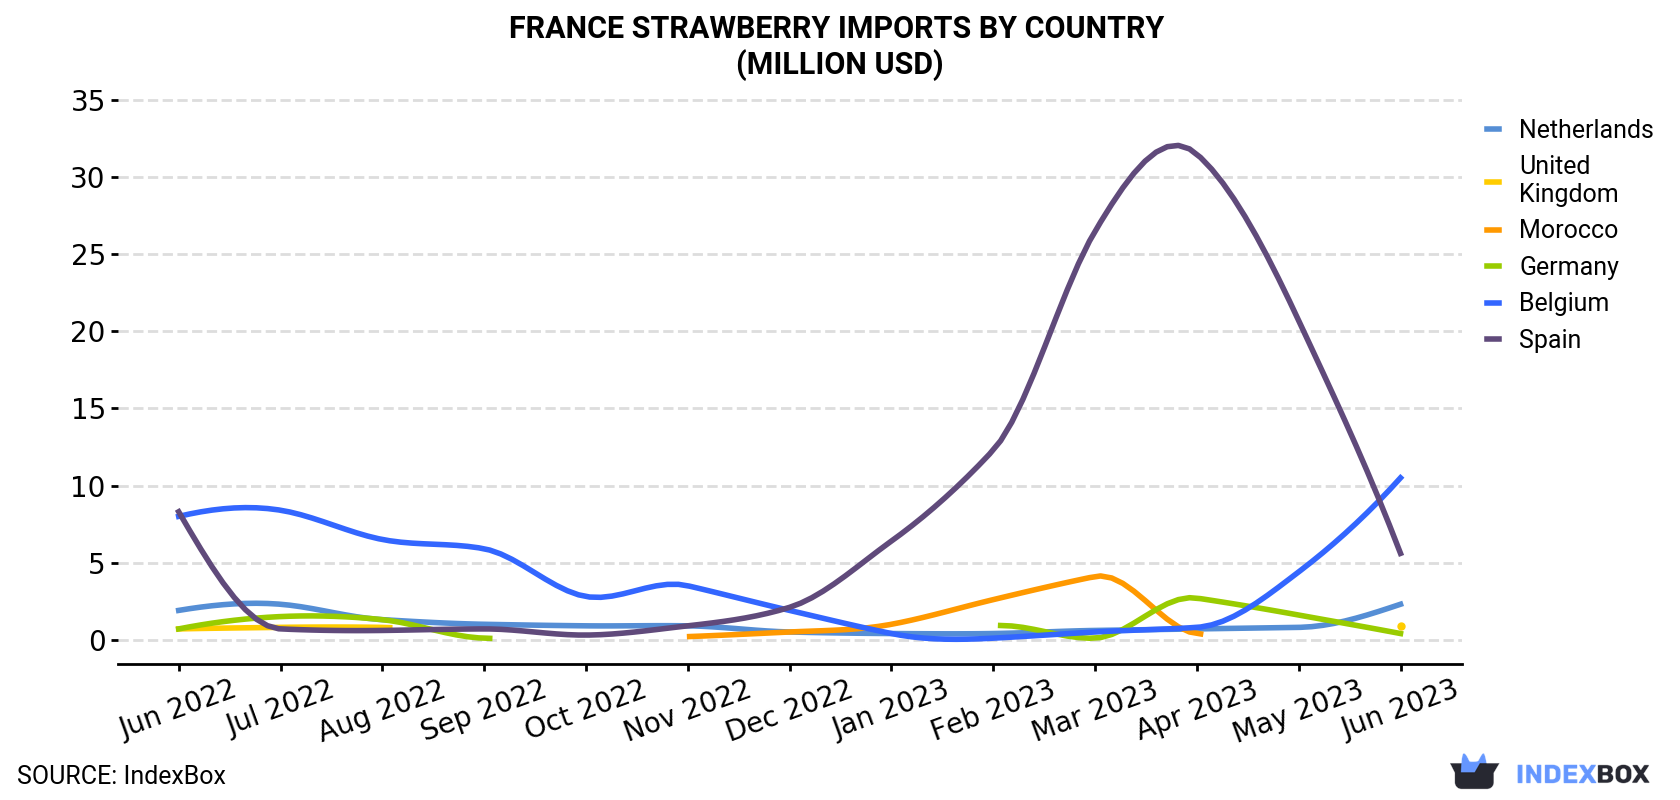 France Strawberry Imports By Country (Million USD)